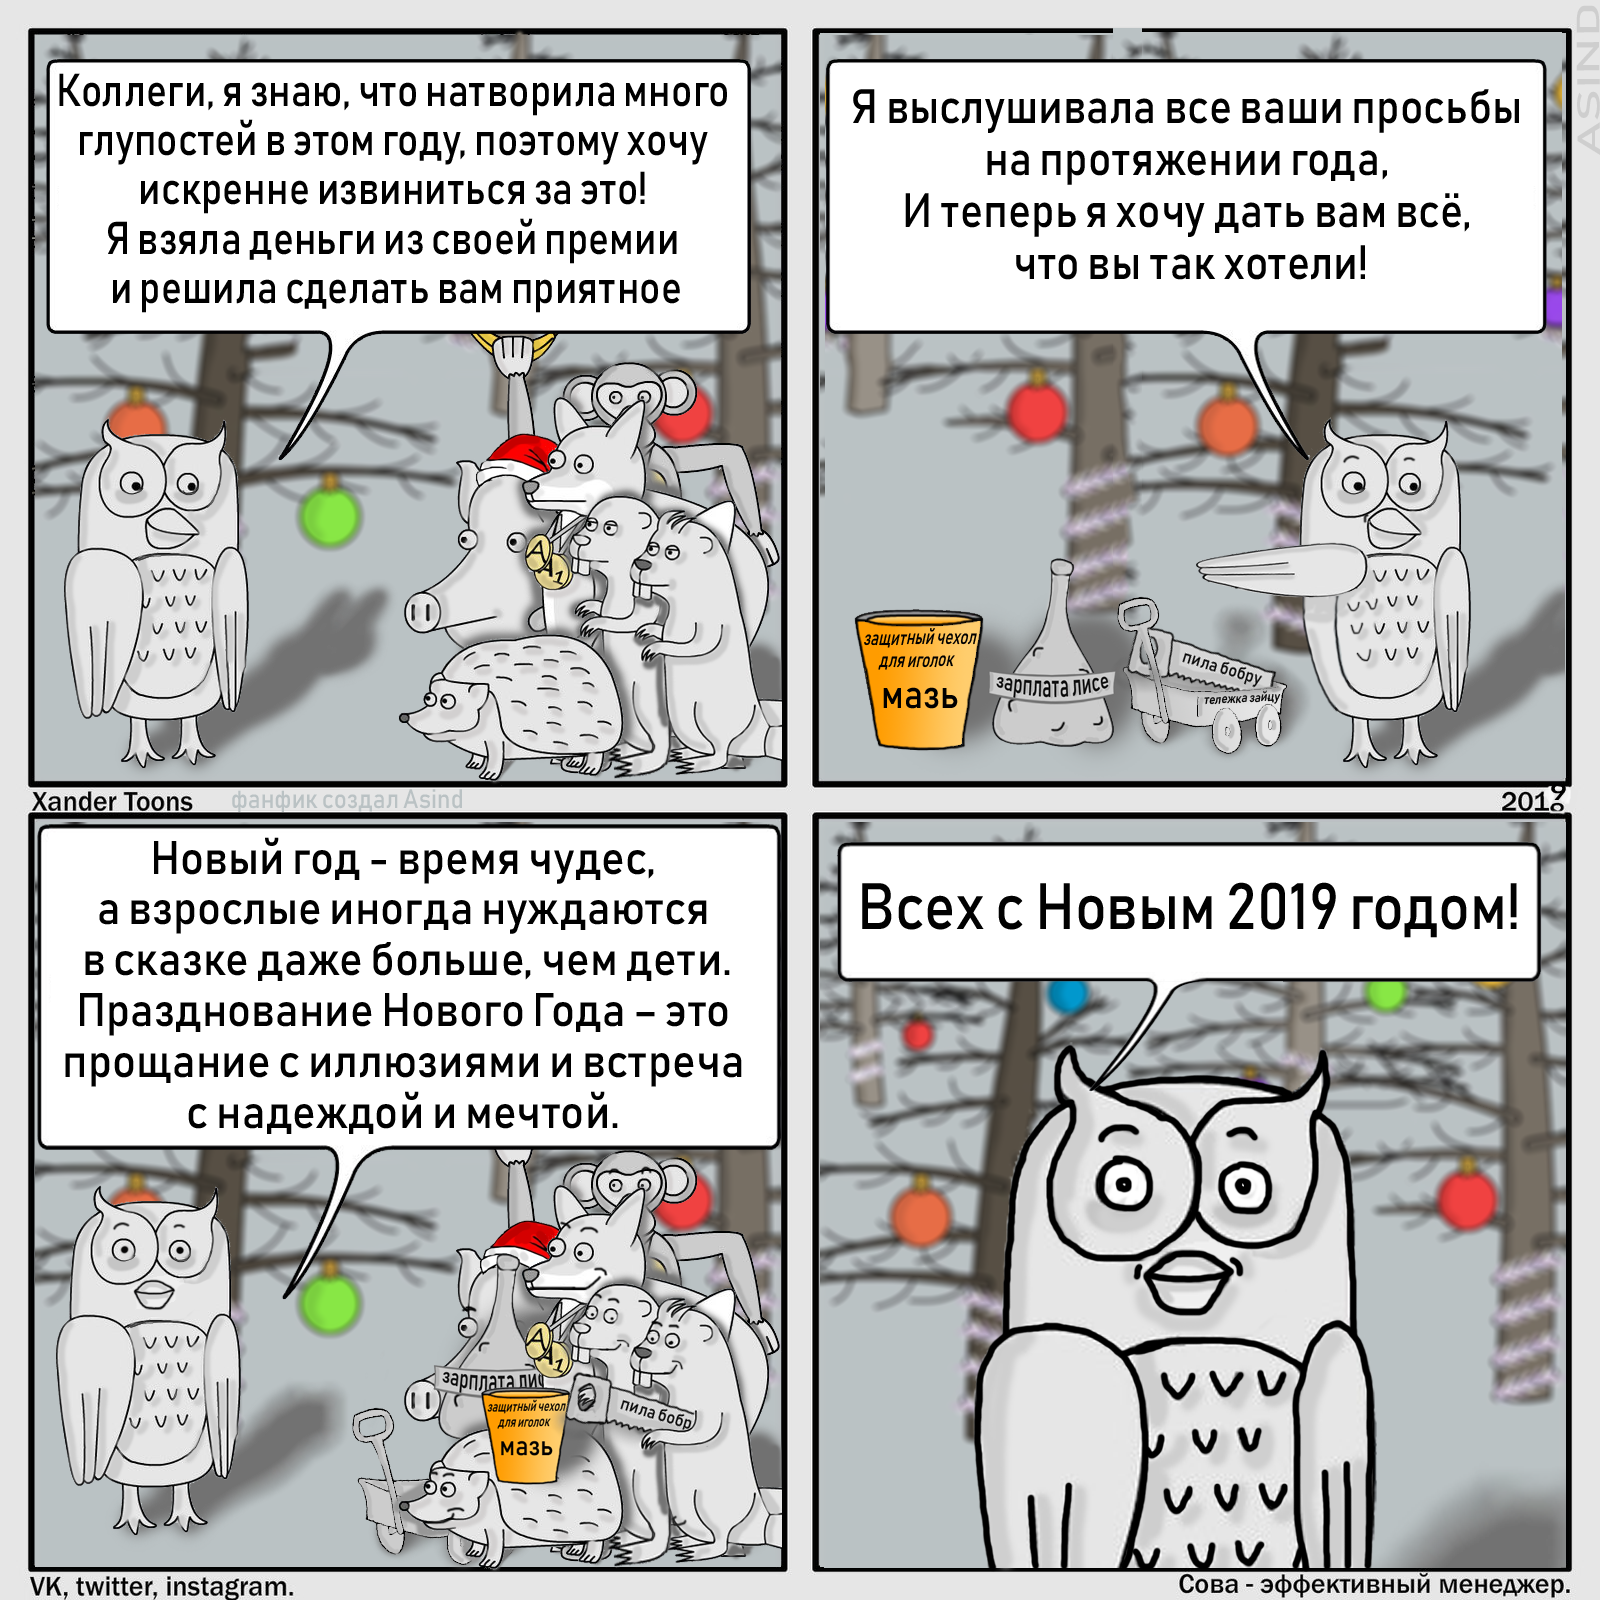 Owl is an effective manager. - My, Comics, New Year, New Year's miracle, Fanfiction about the effective owl, Owl, Humor